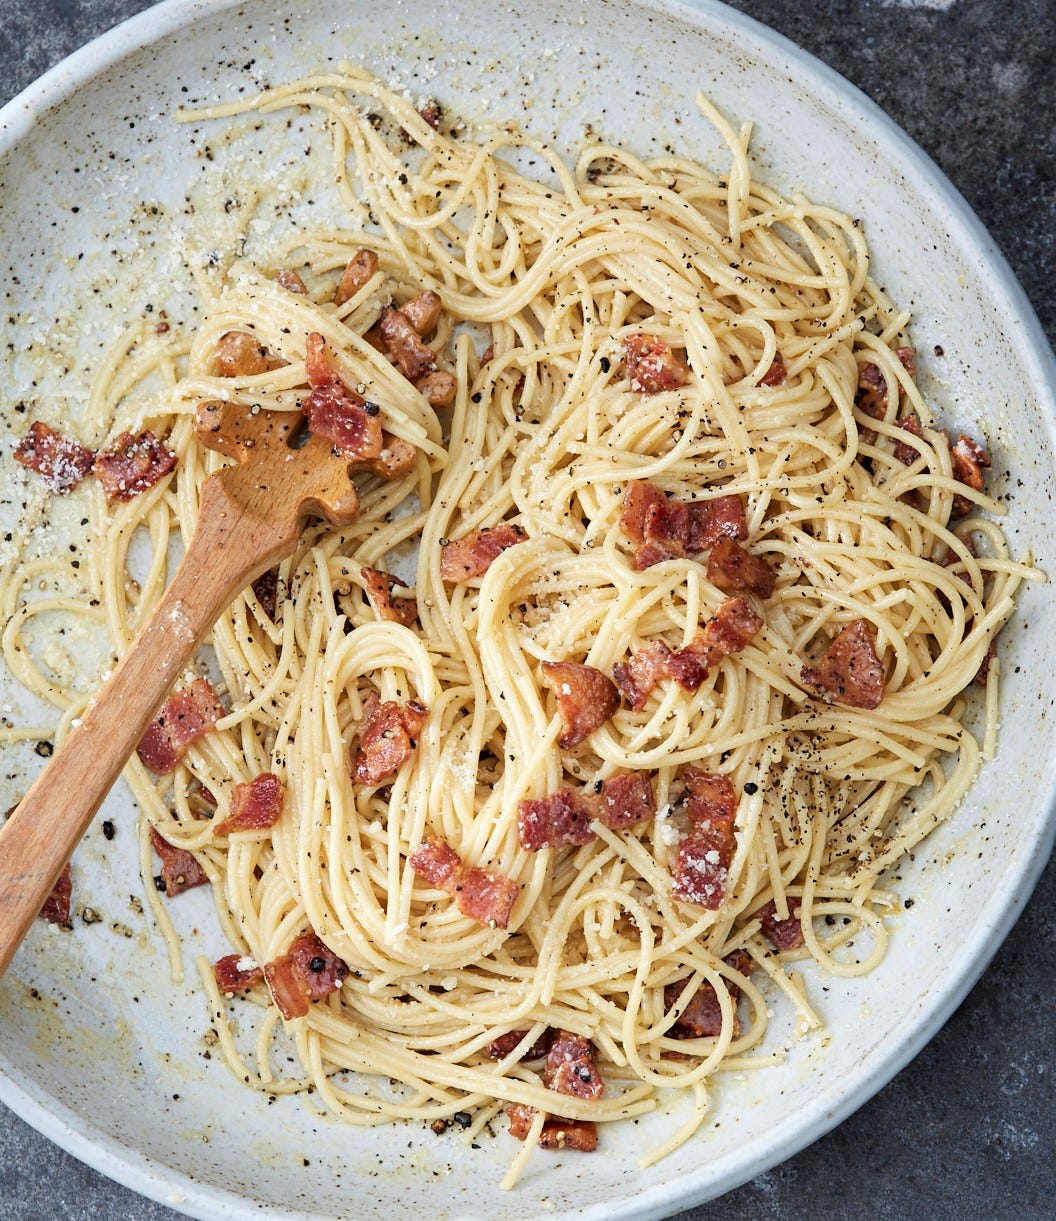 Pasta Carbonara Is Your Go-To Weekday Dish | by Mark Bittman | Heated